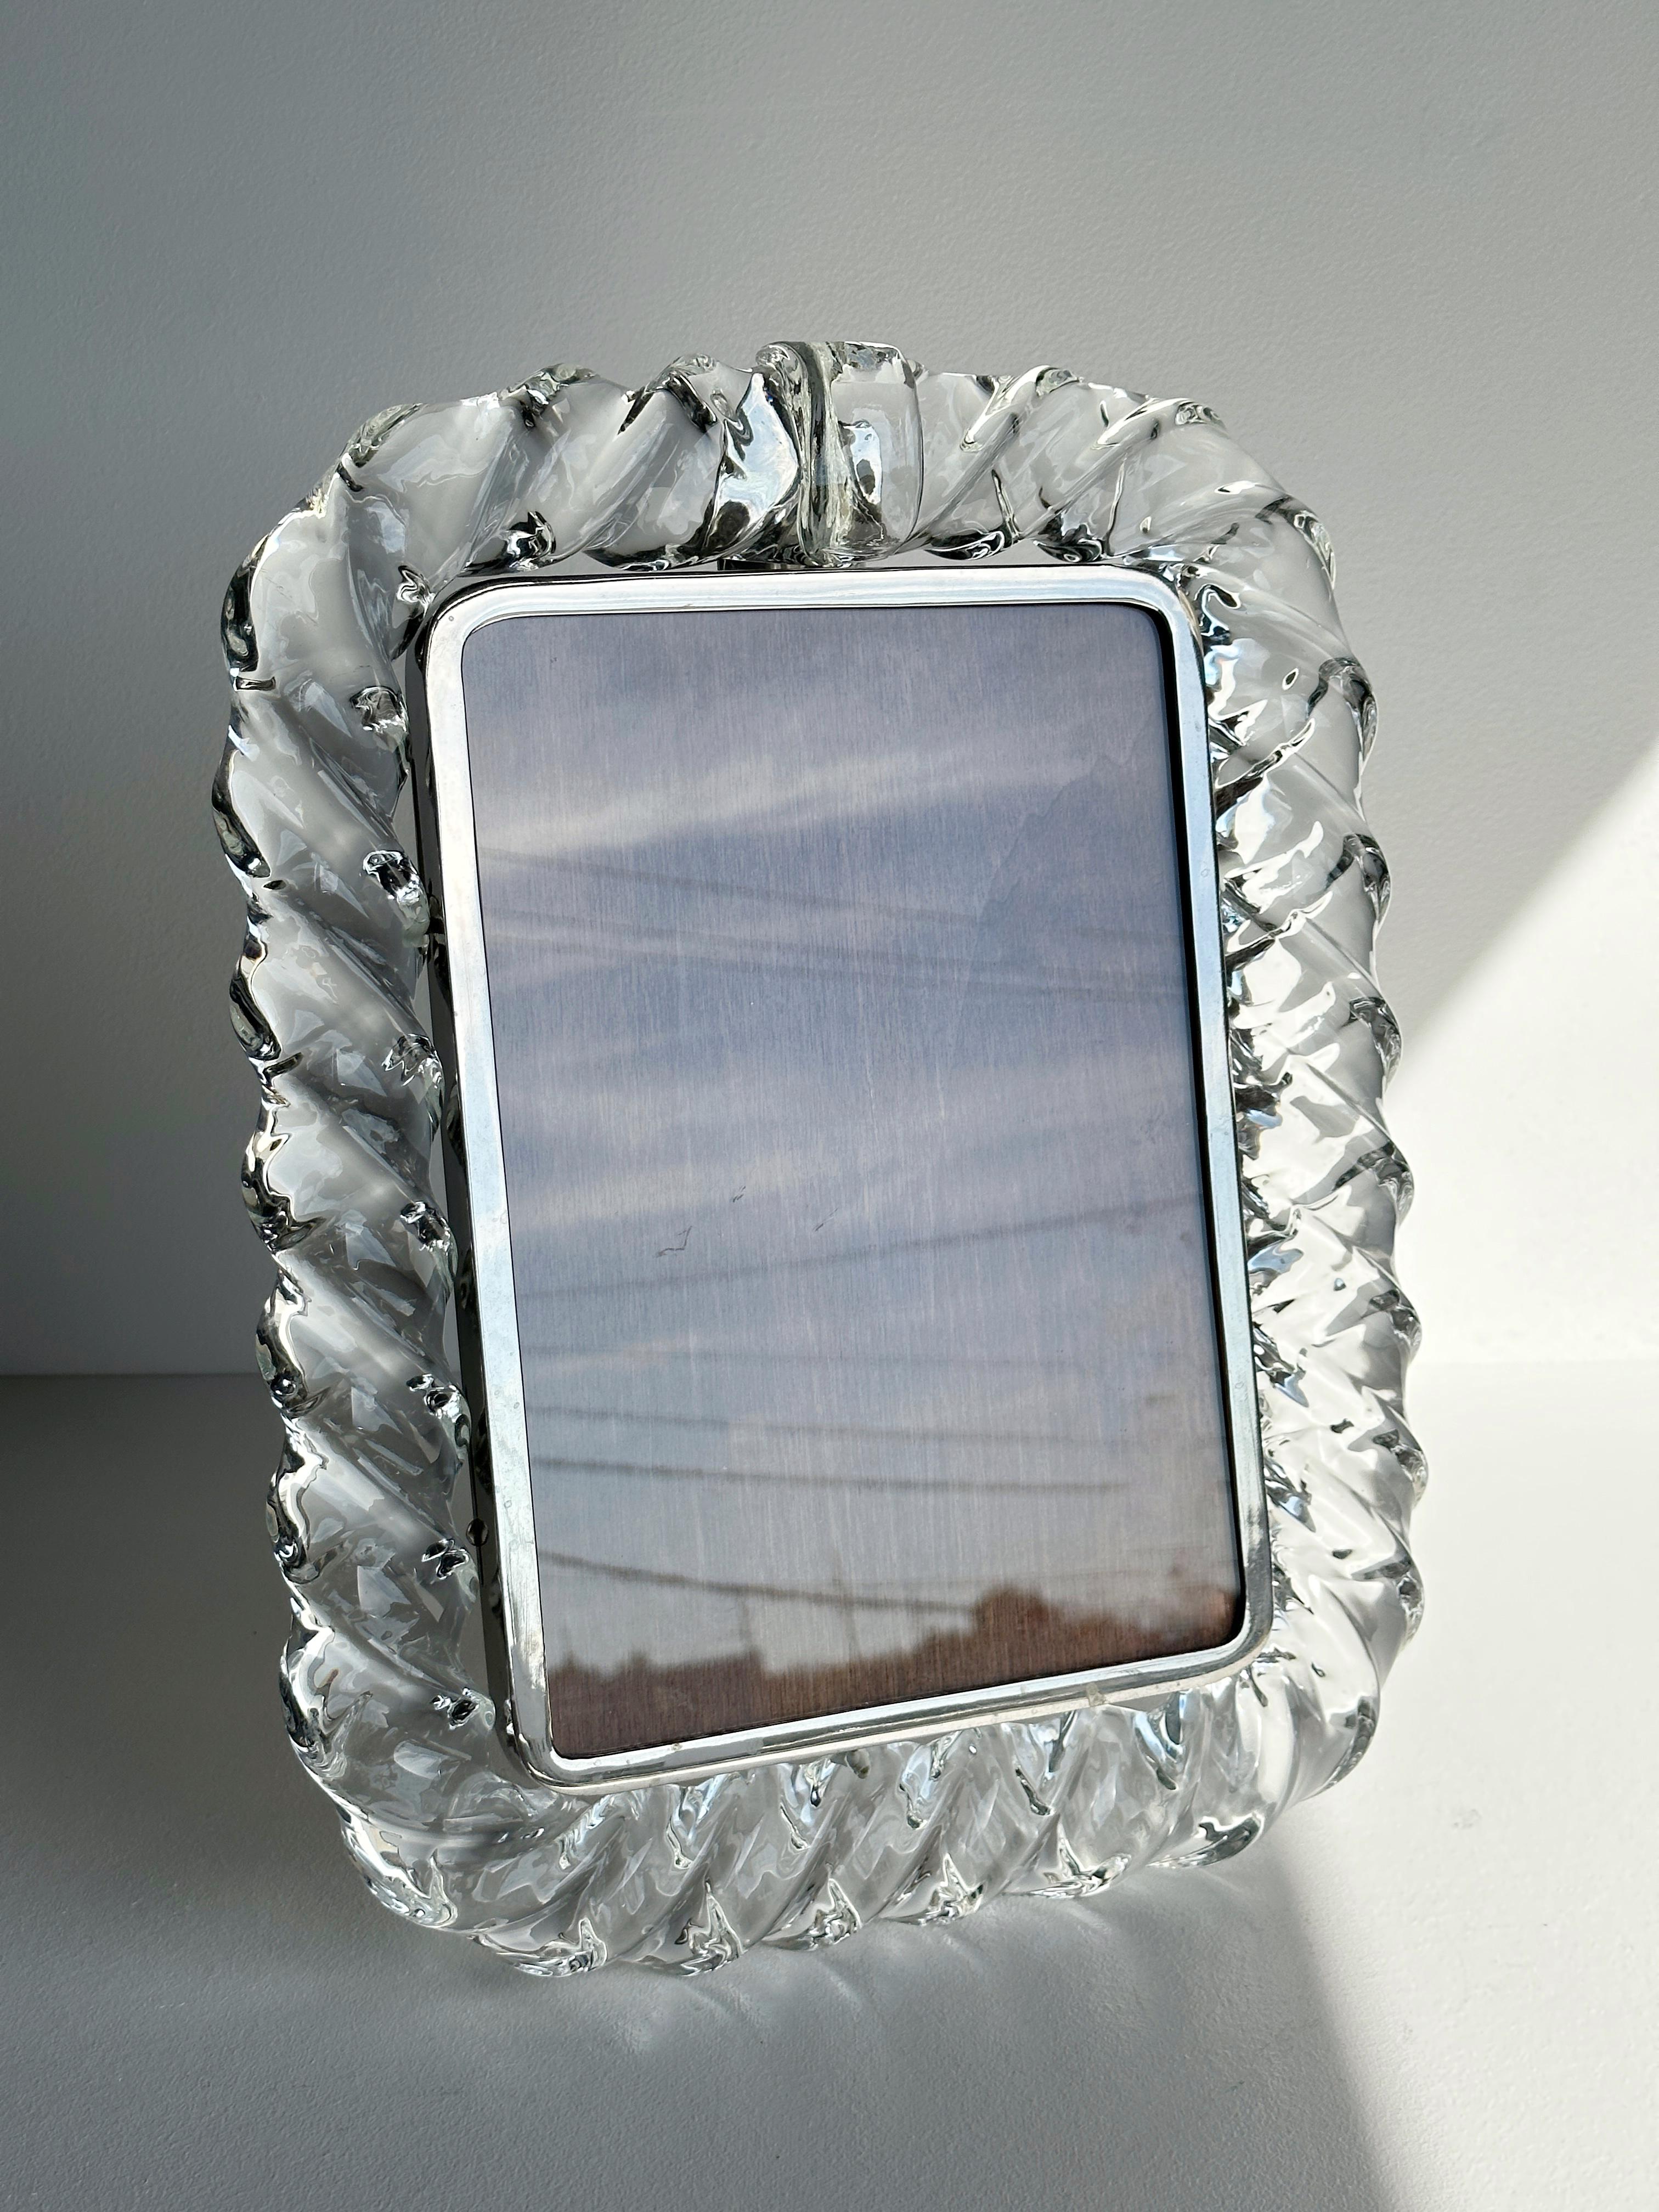 Large and beautiful Murano glass “rope twist” picture frame with metal t-stand. Shows very well with minimal wear, one area chipped in the interior where the post connects metal frame to glass, not visible to the eye from the front and only visible